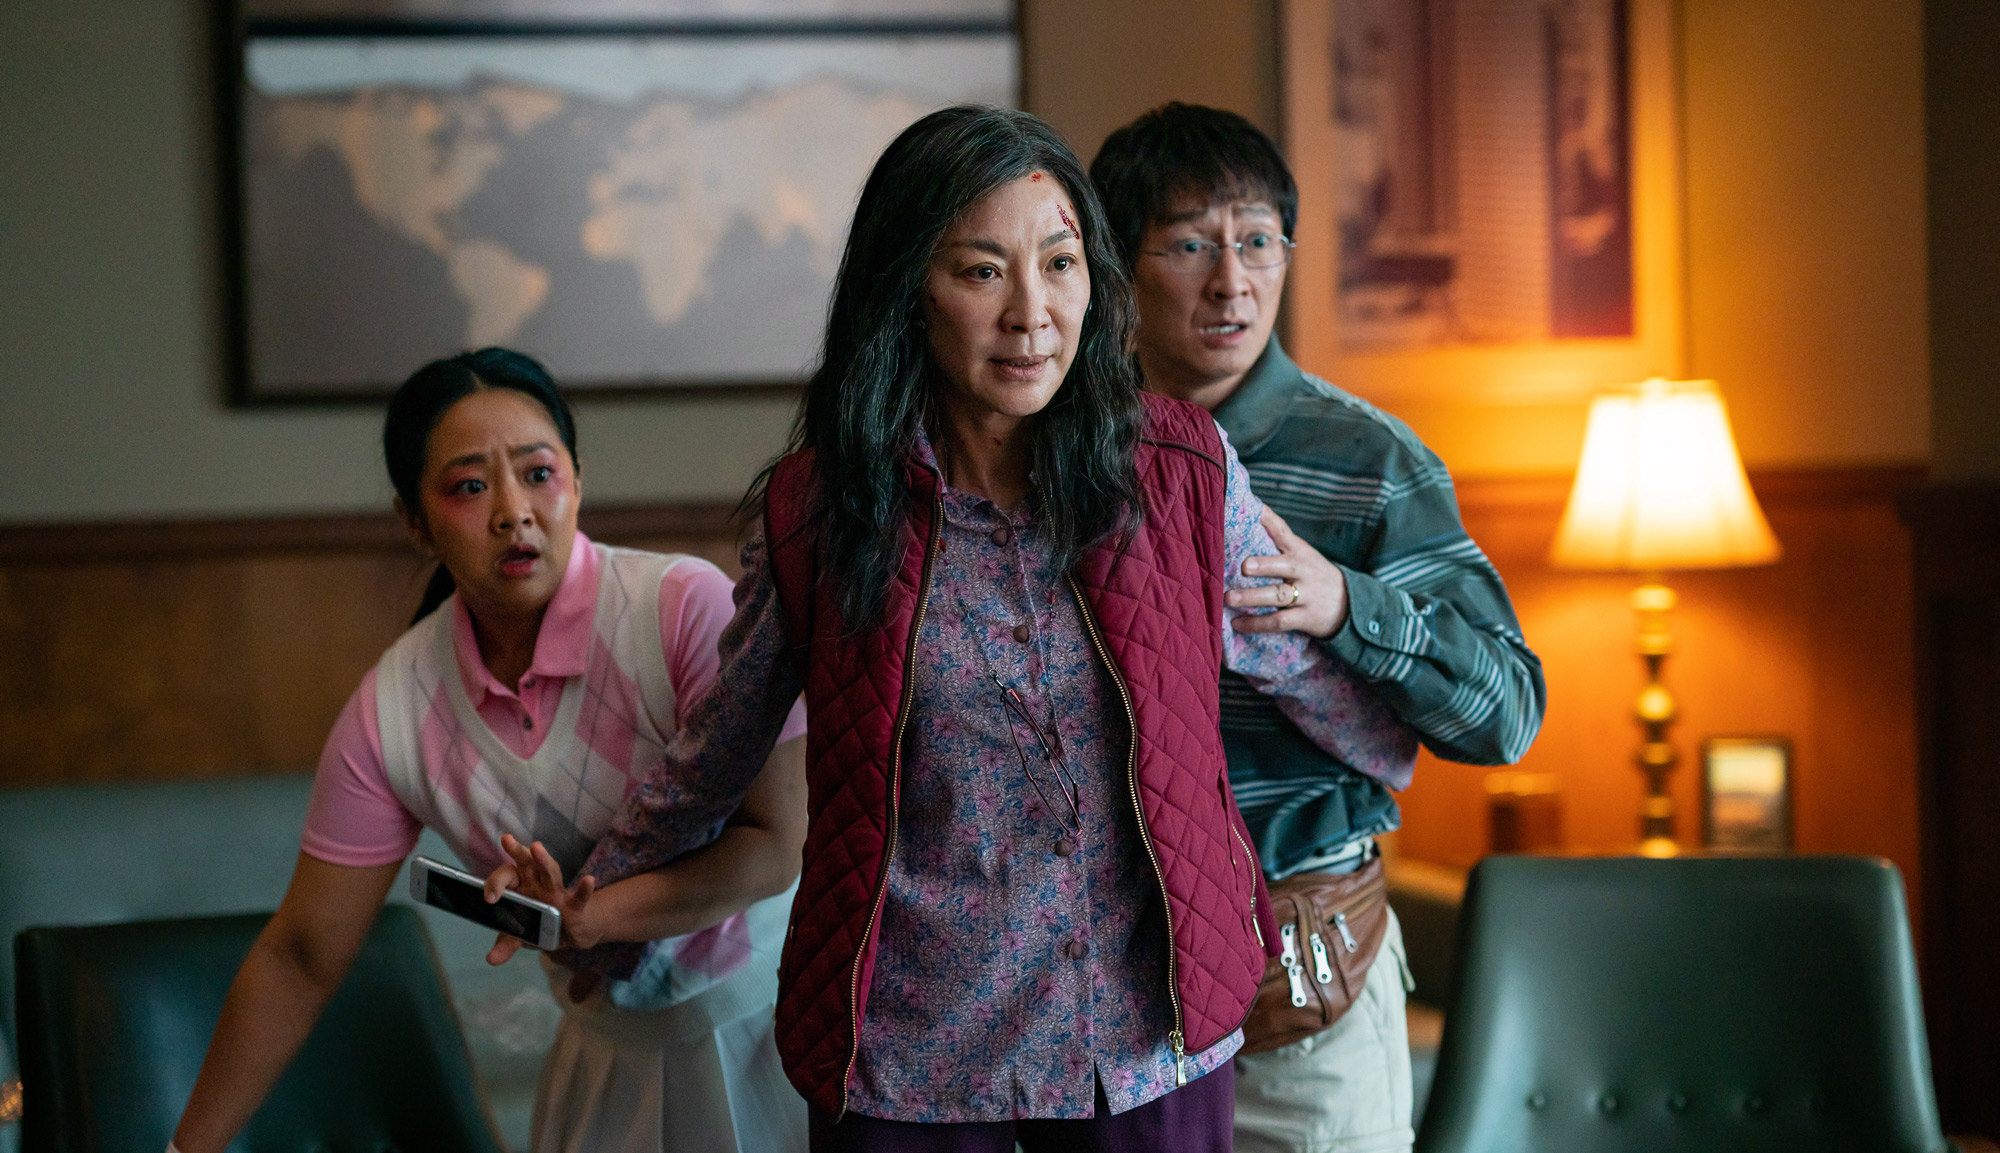 Michelle Yeoh, Stephanie Hsu and Ke Huy Quan in "Everything Everywhere All at Once"